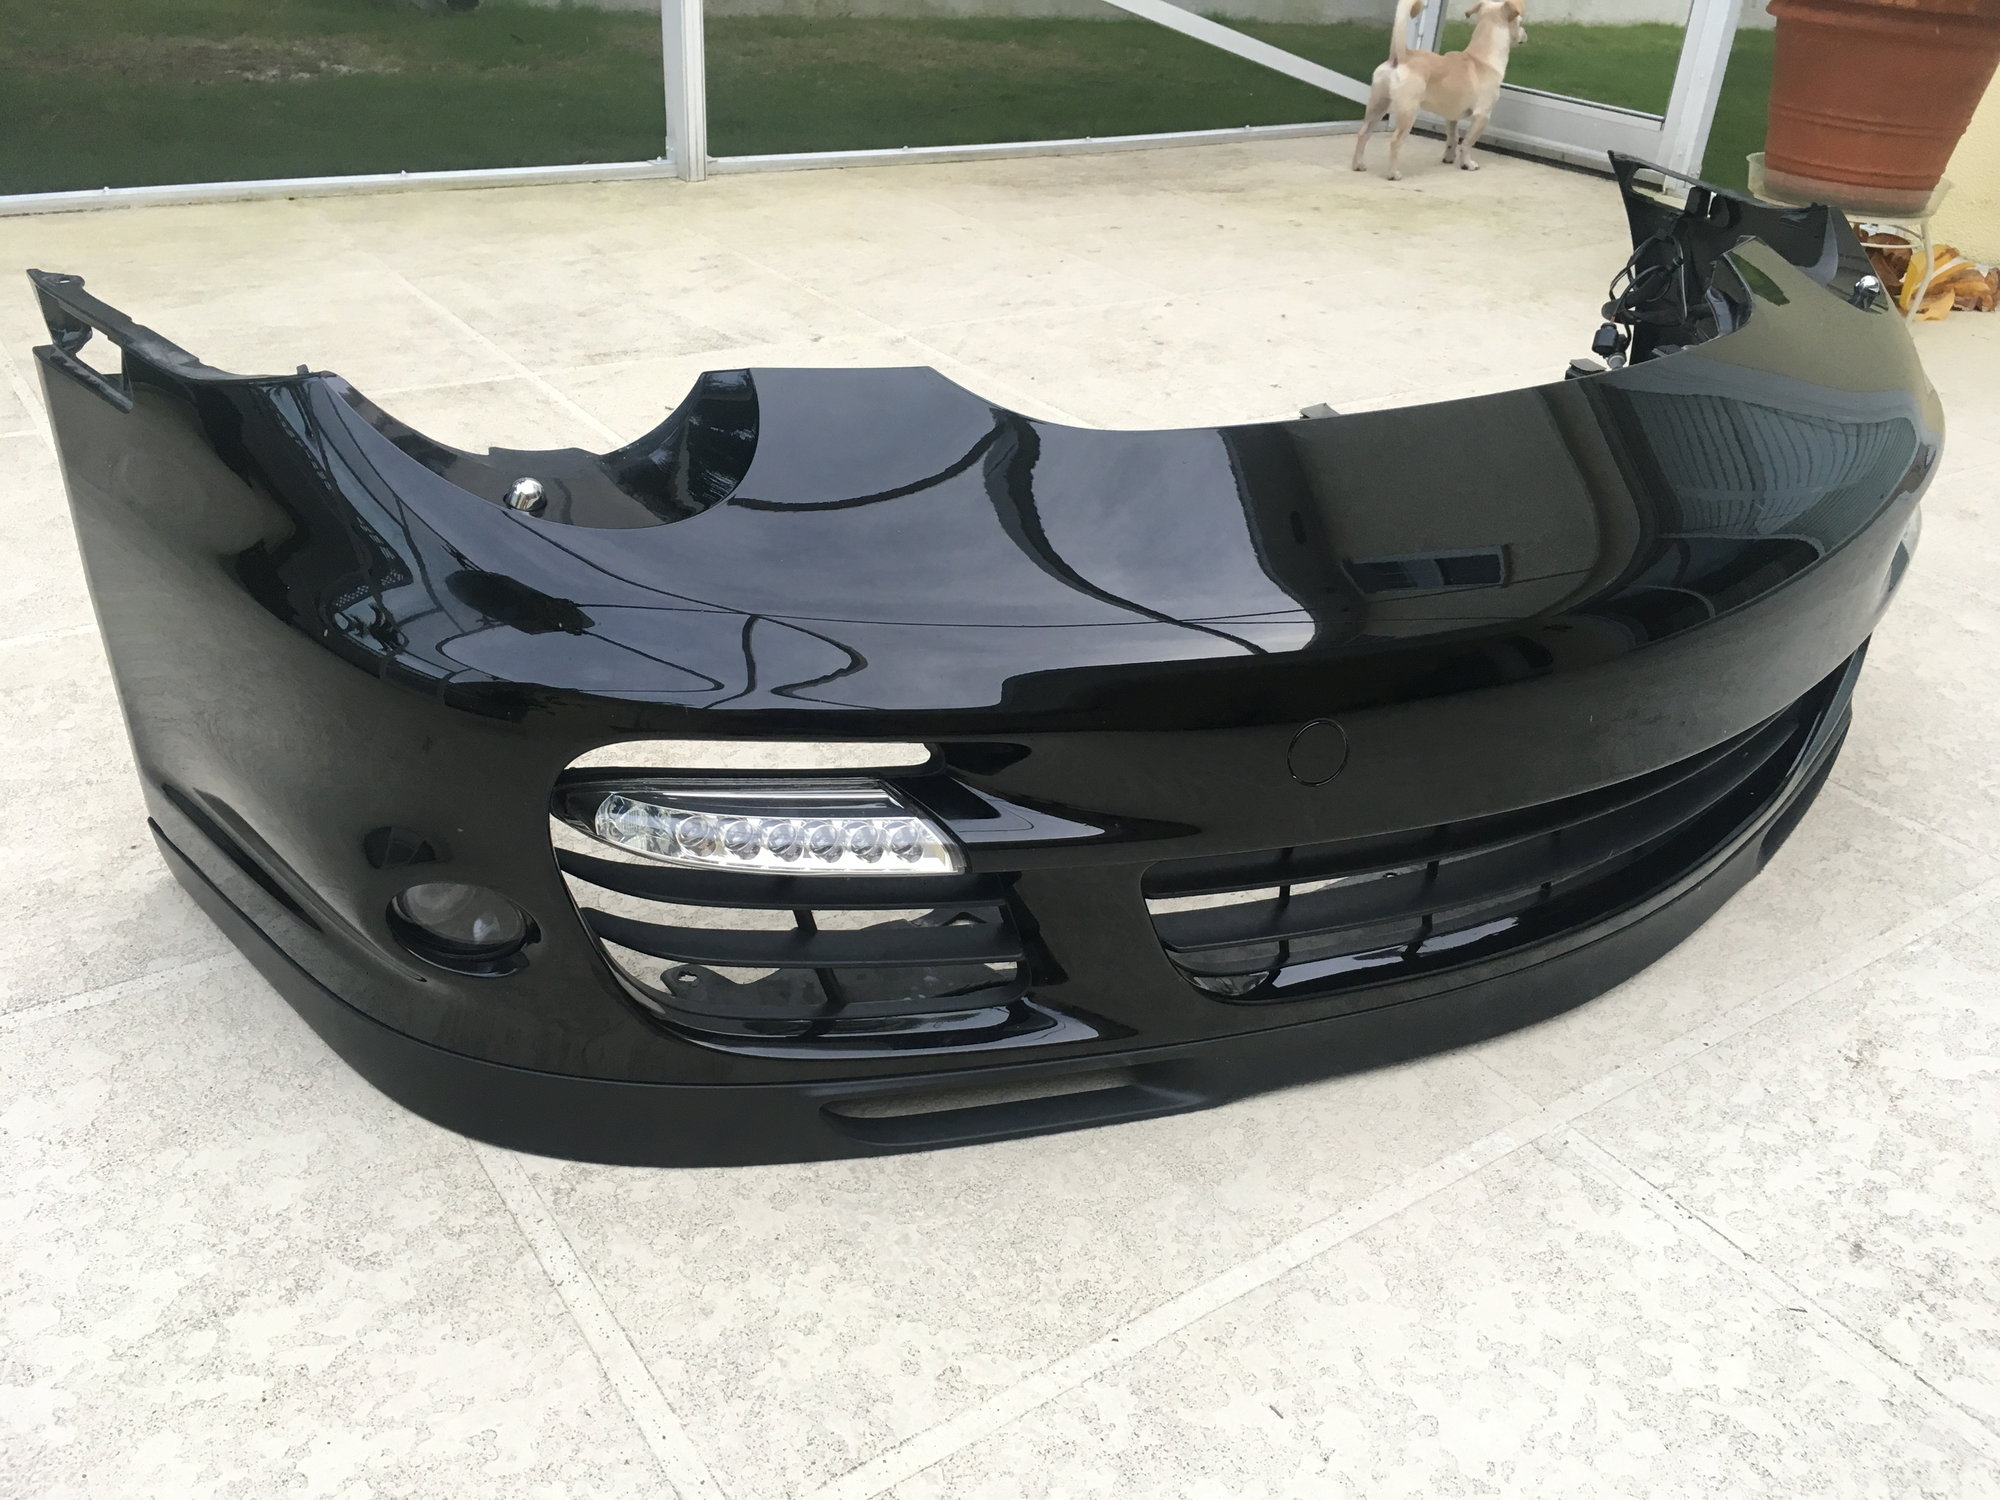 Exterior Body Parts - 997.1 Turbo Front Bumper and parts (LED turns, fogs, grilles, lip, HL washers) - Used - 2007 to 2009 Porsche 911 - Jupiter, FL 33458, United States